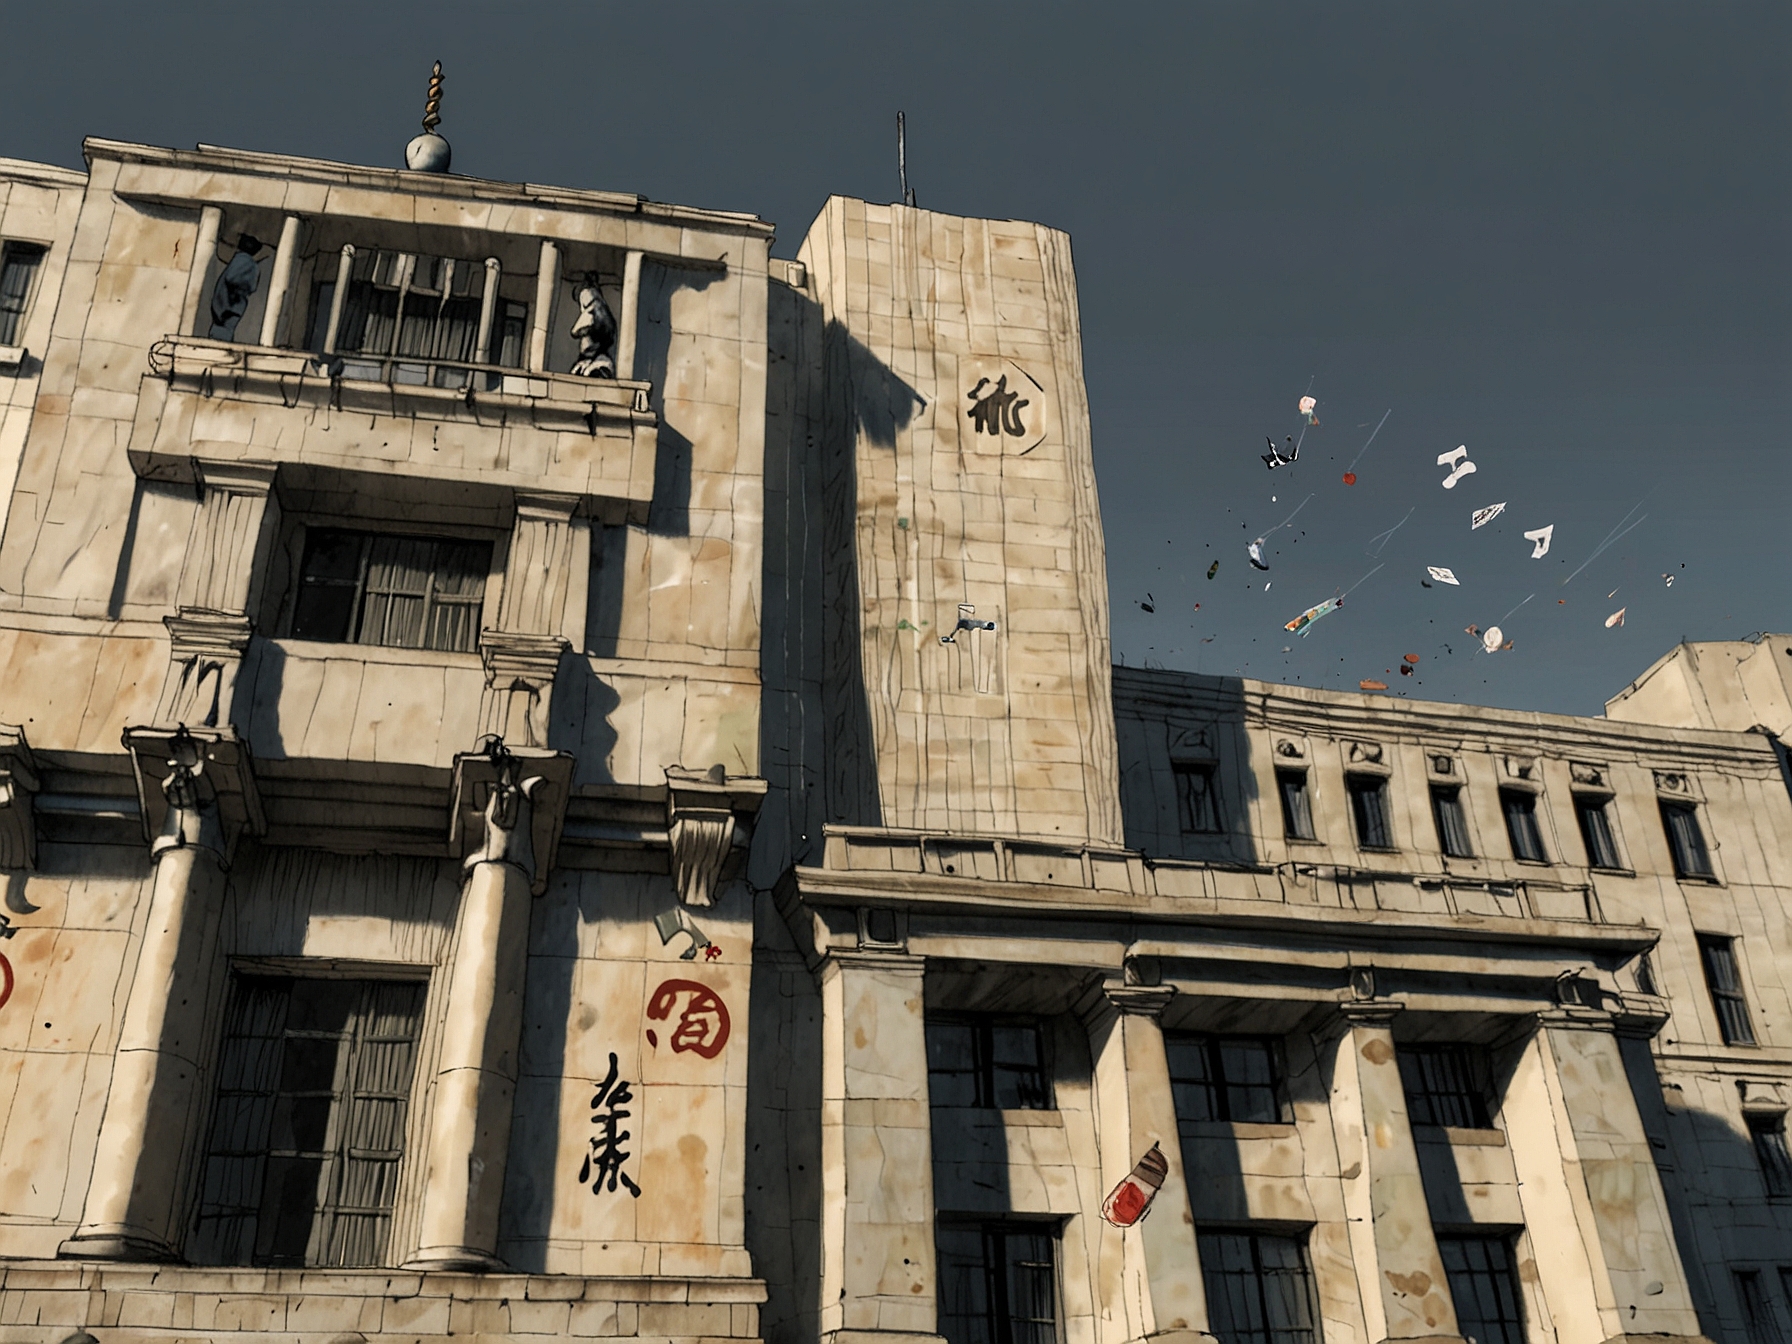 An image of the Bank of Japan building, with a backdrop of currency symbols and commodity prices, symbolizing the interplay between monetary policy, inflation rates, and international economic impacts.